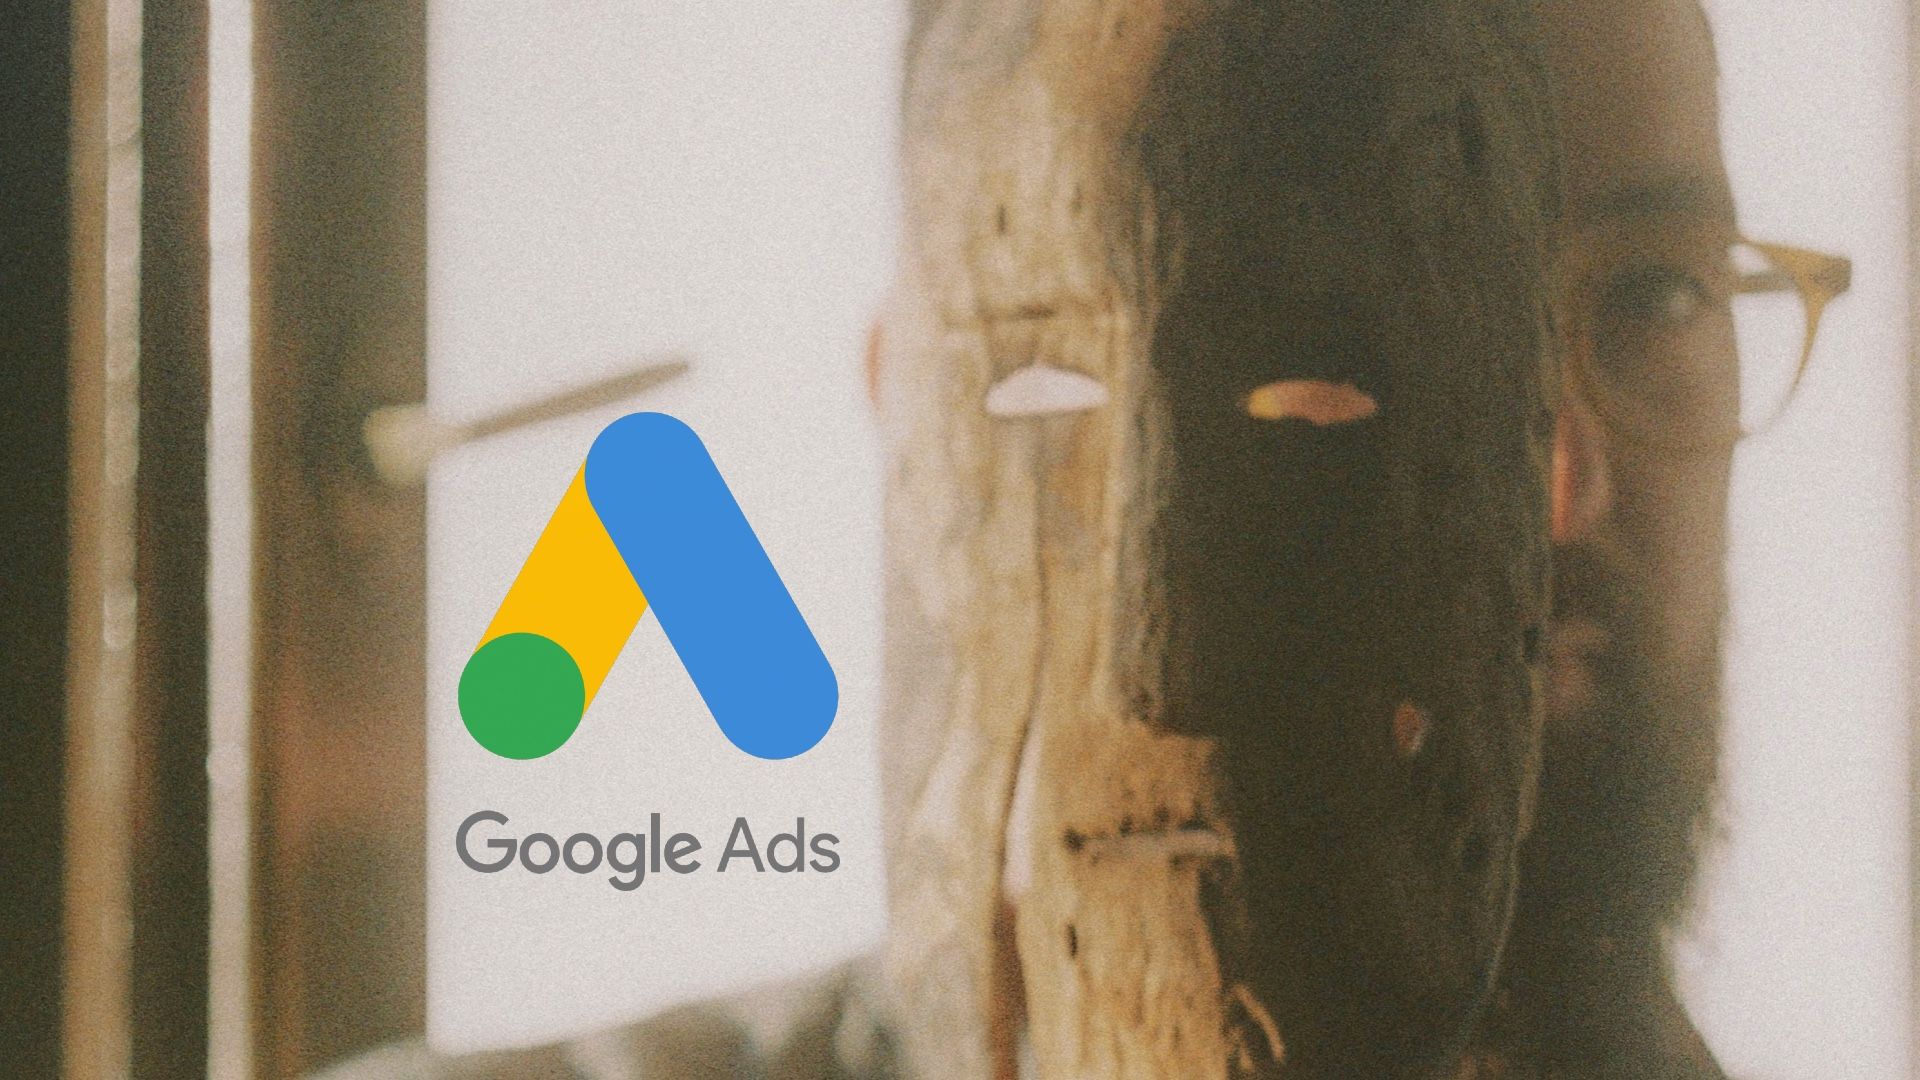 Google Ads expands advertising verification program to new countries